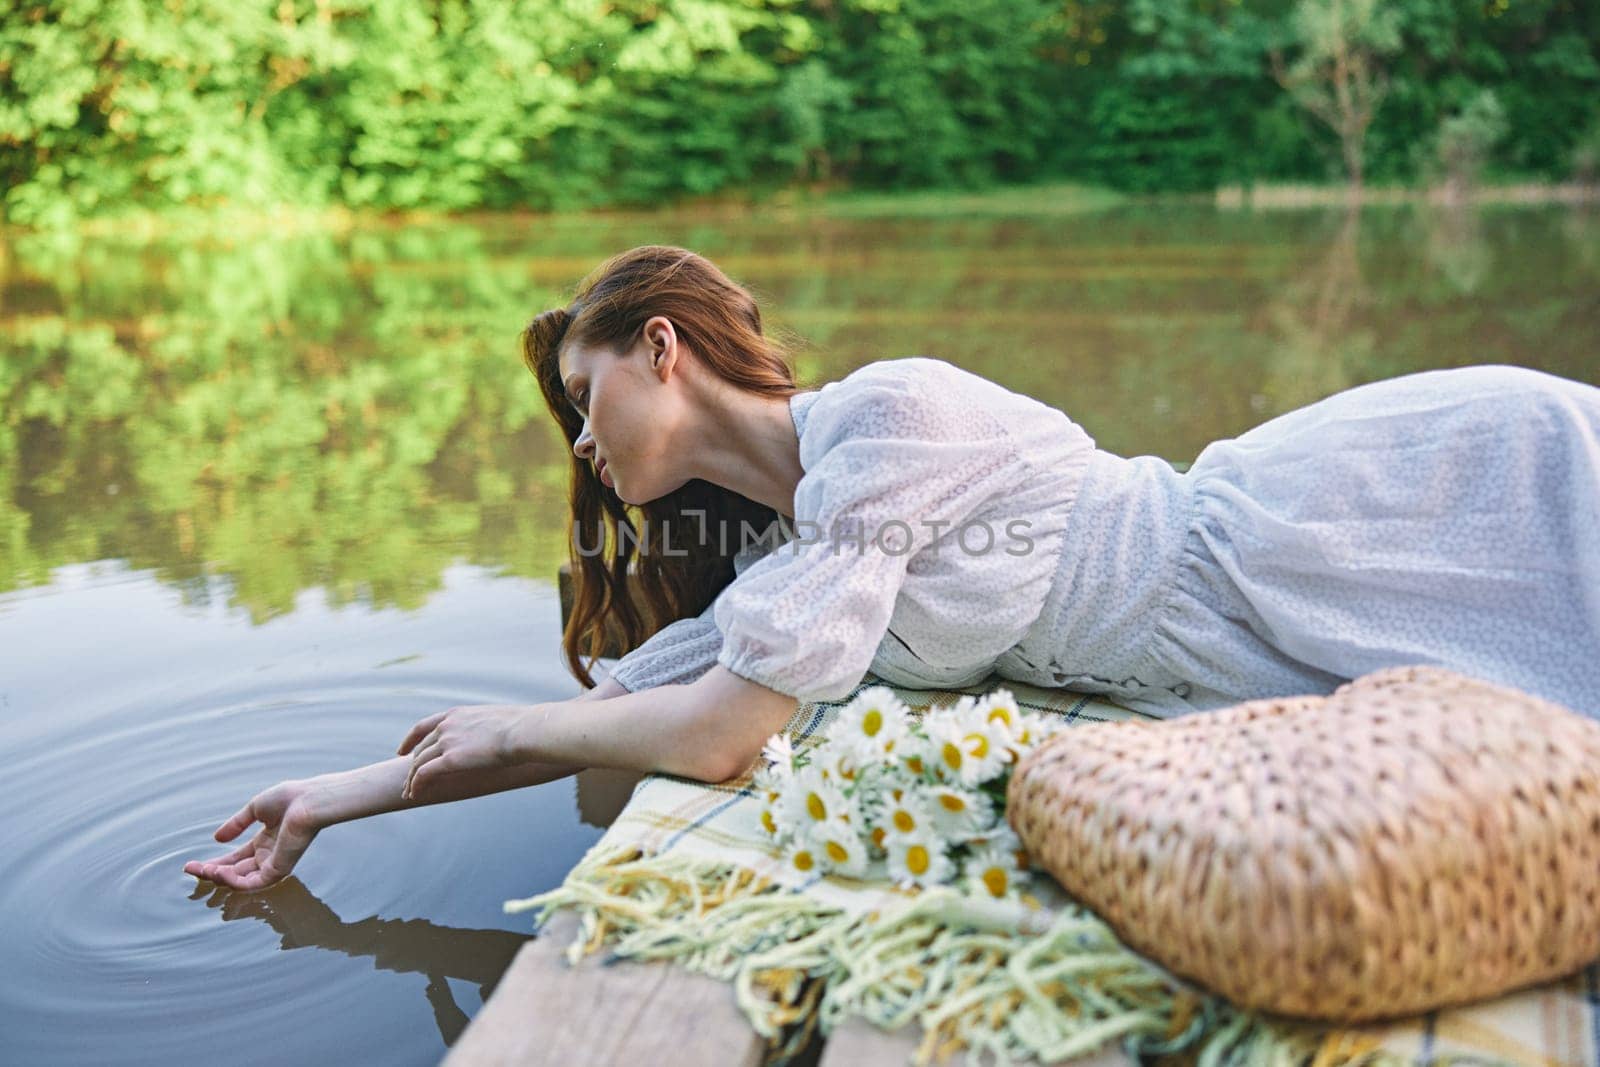 a sophisticated woman in a light dress touches the water while relaxing by the lake by Vichizh